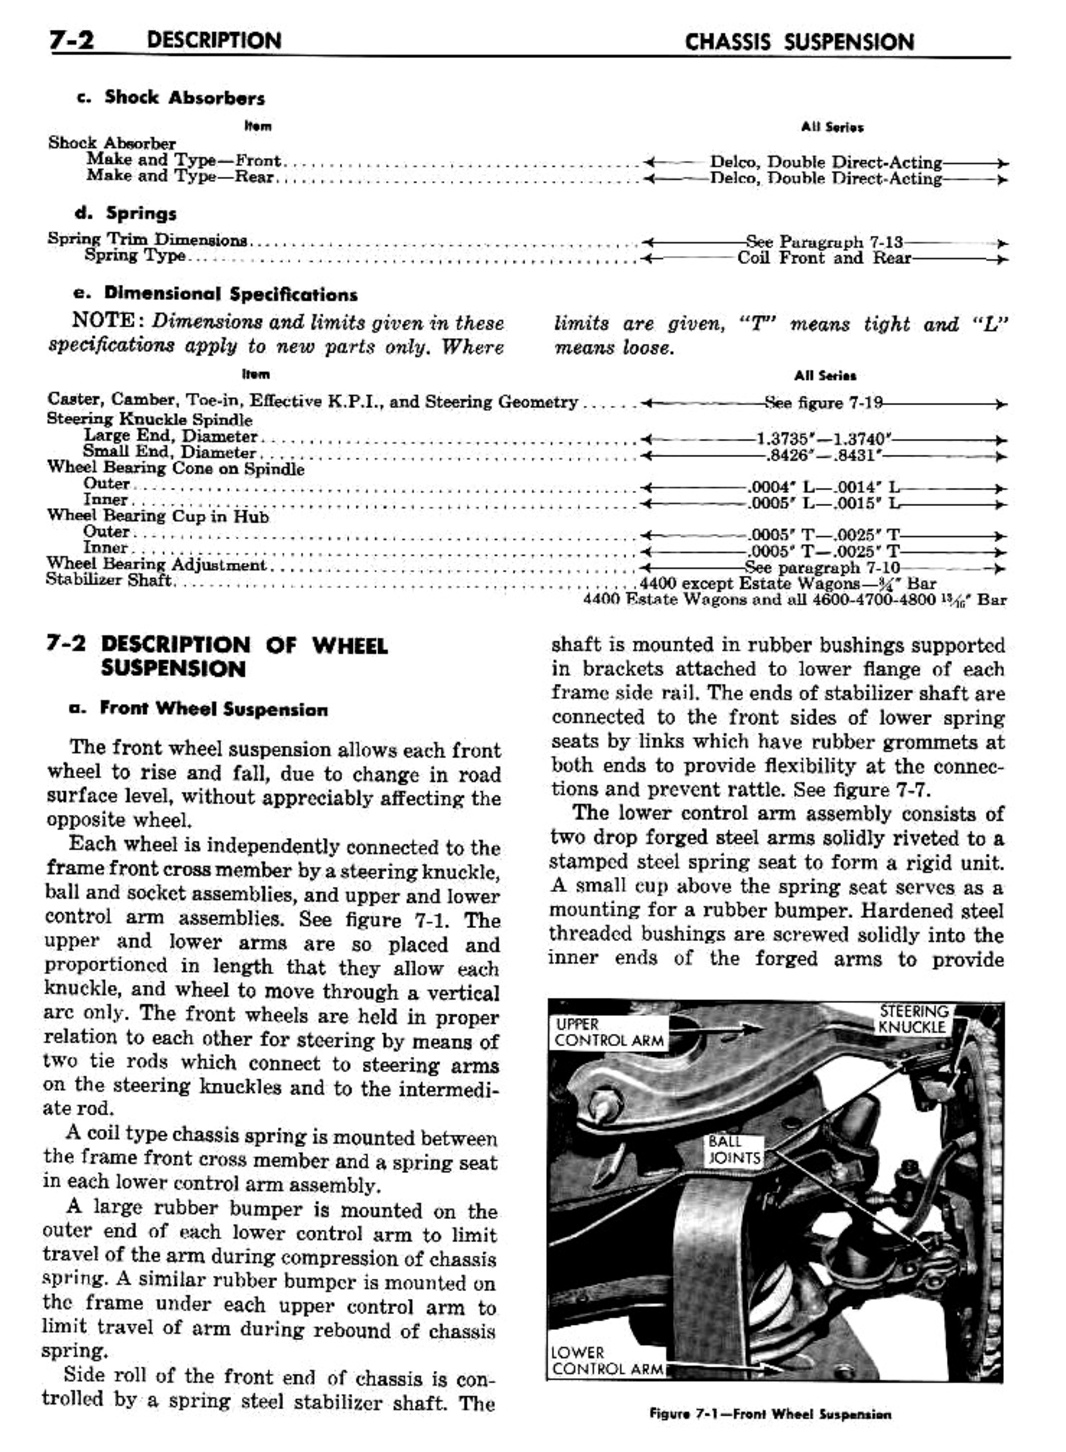 n_08 1960 Buick Shop Manual - Chassis Suspension-002-002.jpg